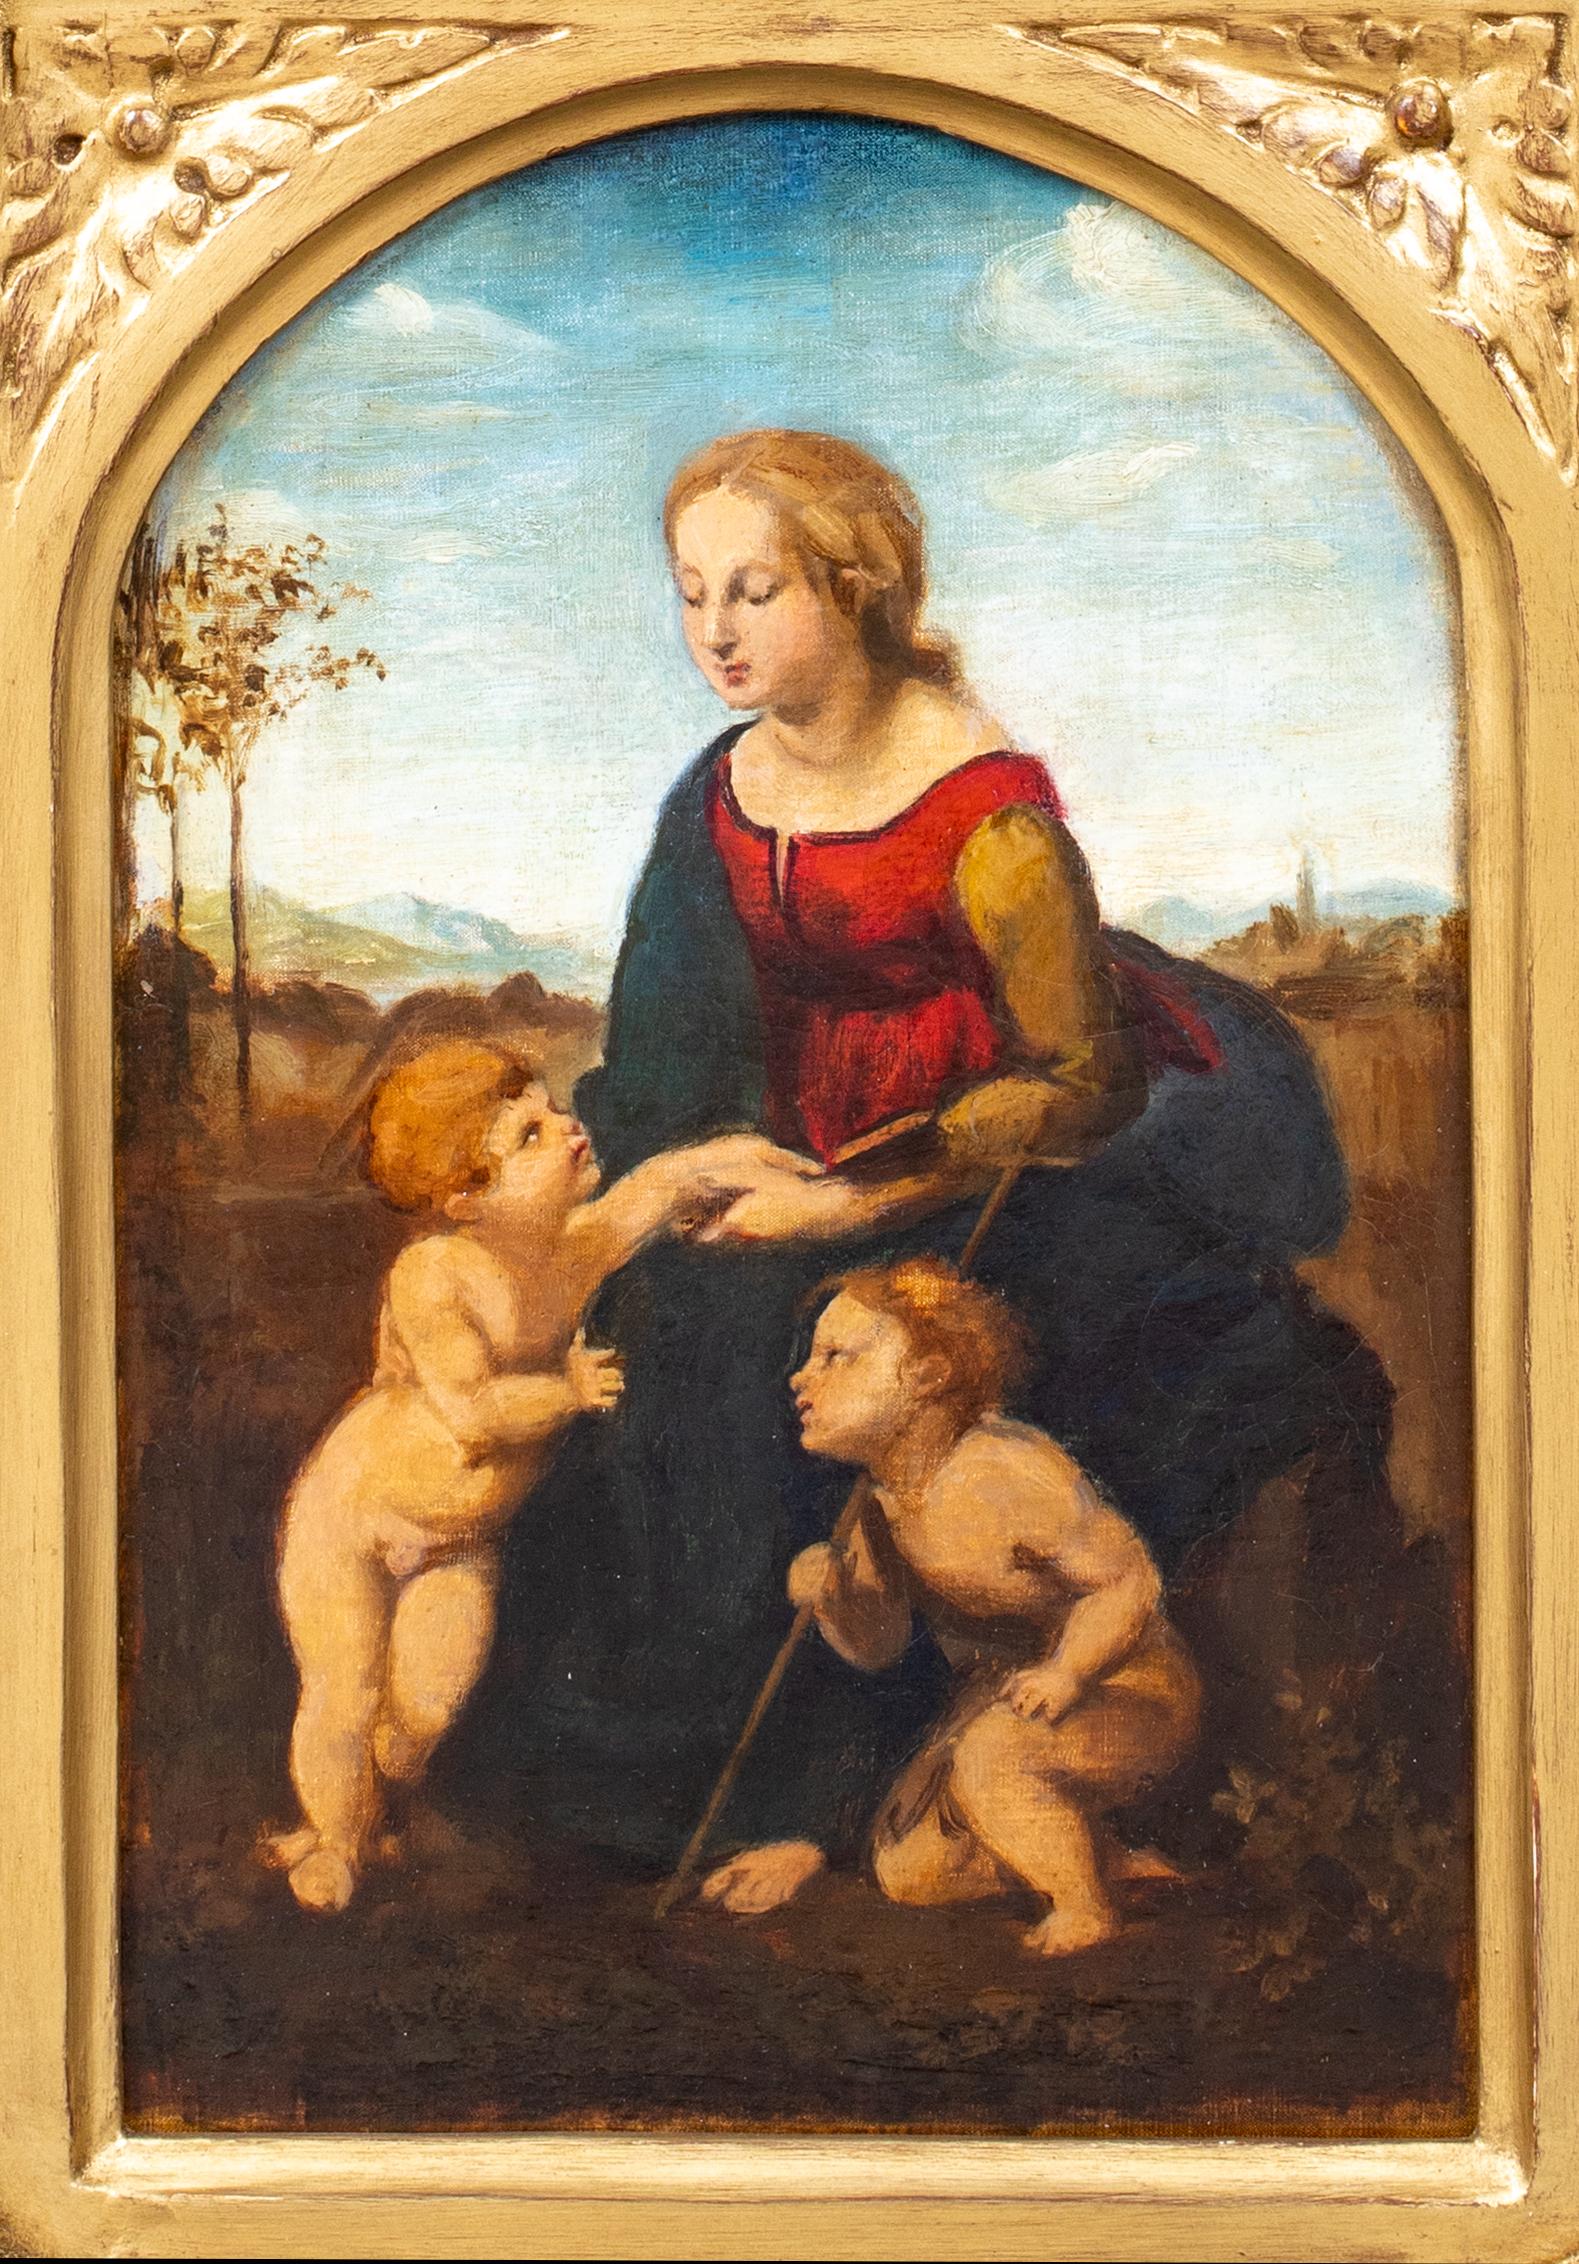 Madonna & Child, 19th Century 

European School - after Raphael (1483-1520)

Raphael


19th Century Italian School scene of the Madonna & Child presented in a handmade antique gilt Florentine frame, oil on canvas. Beautiful version of Raphael's